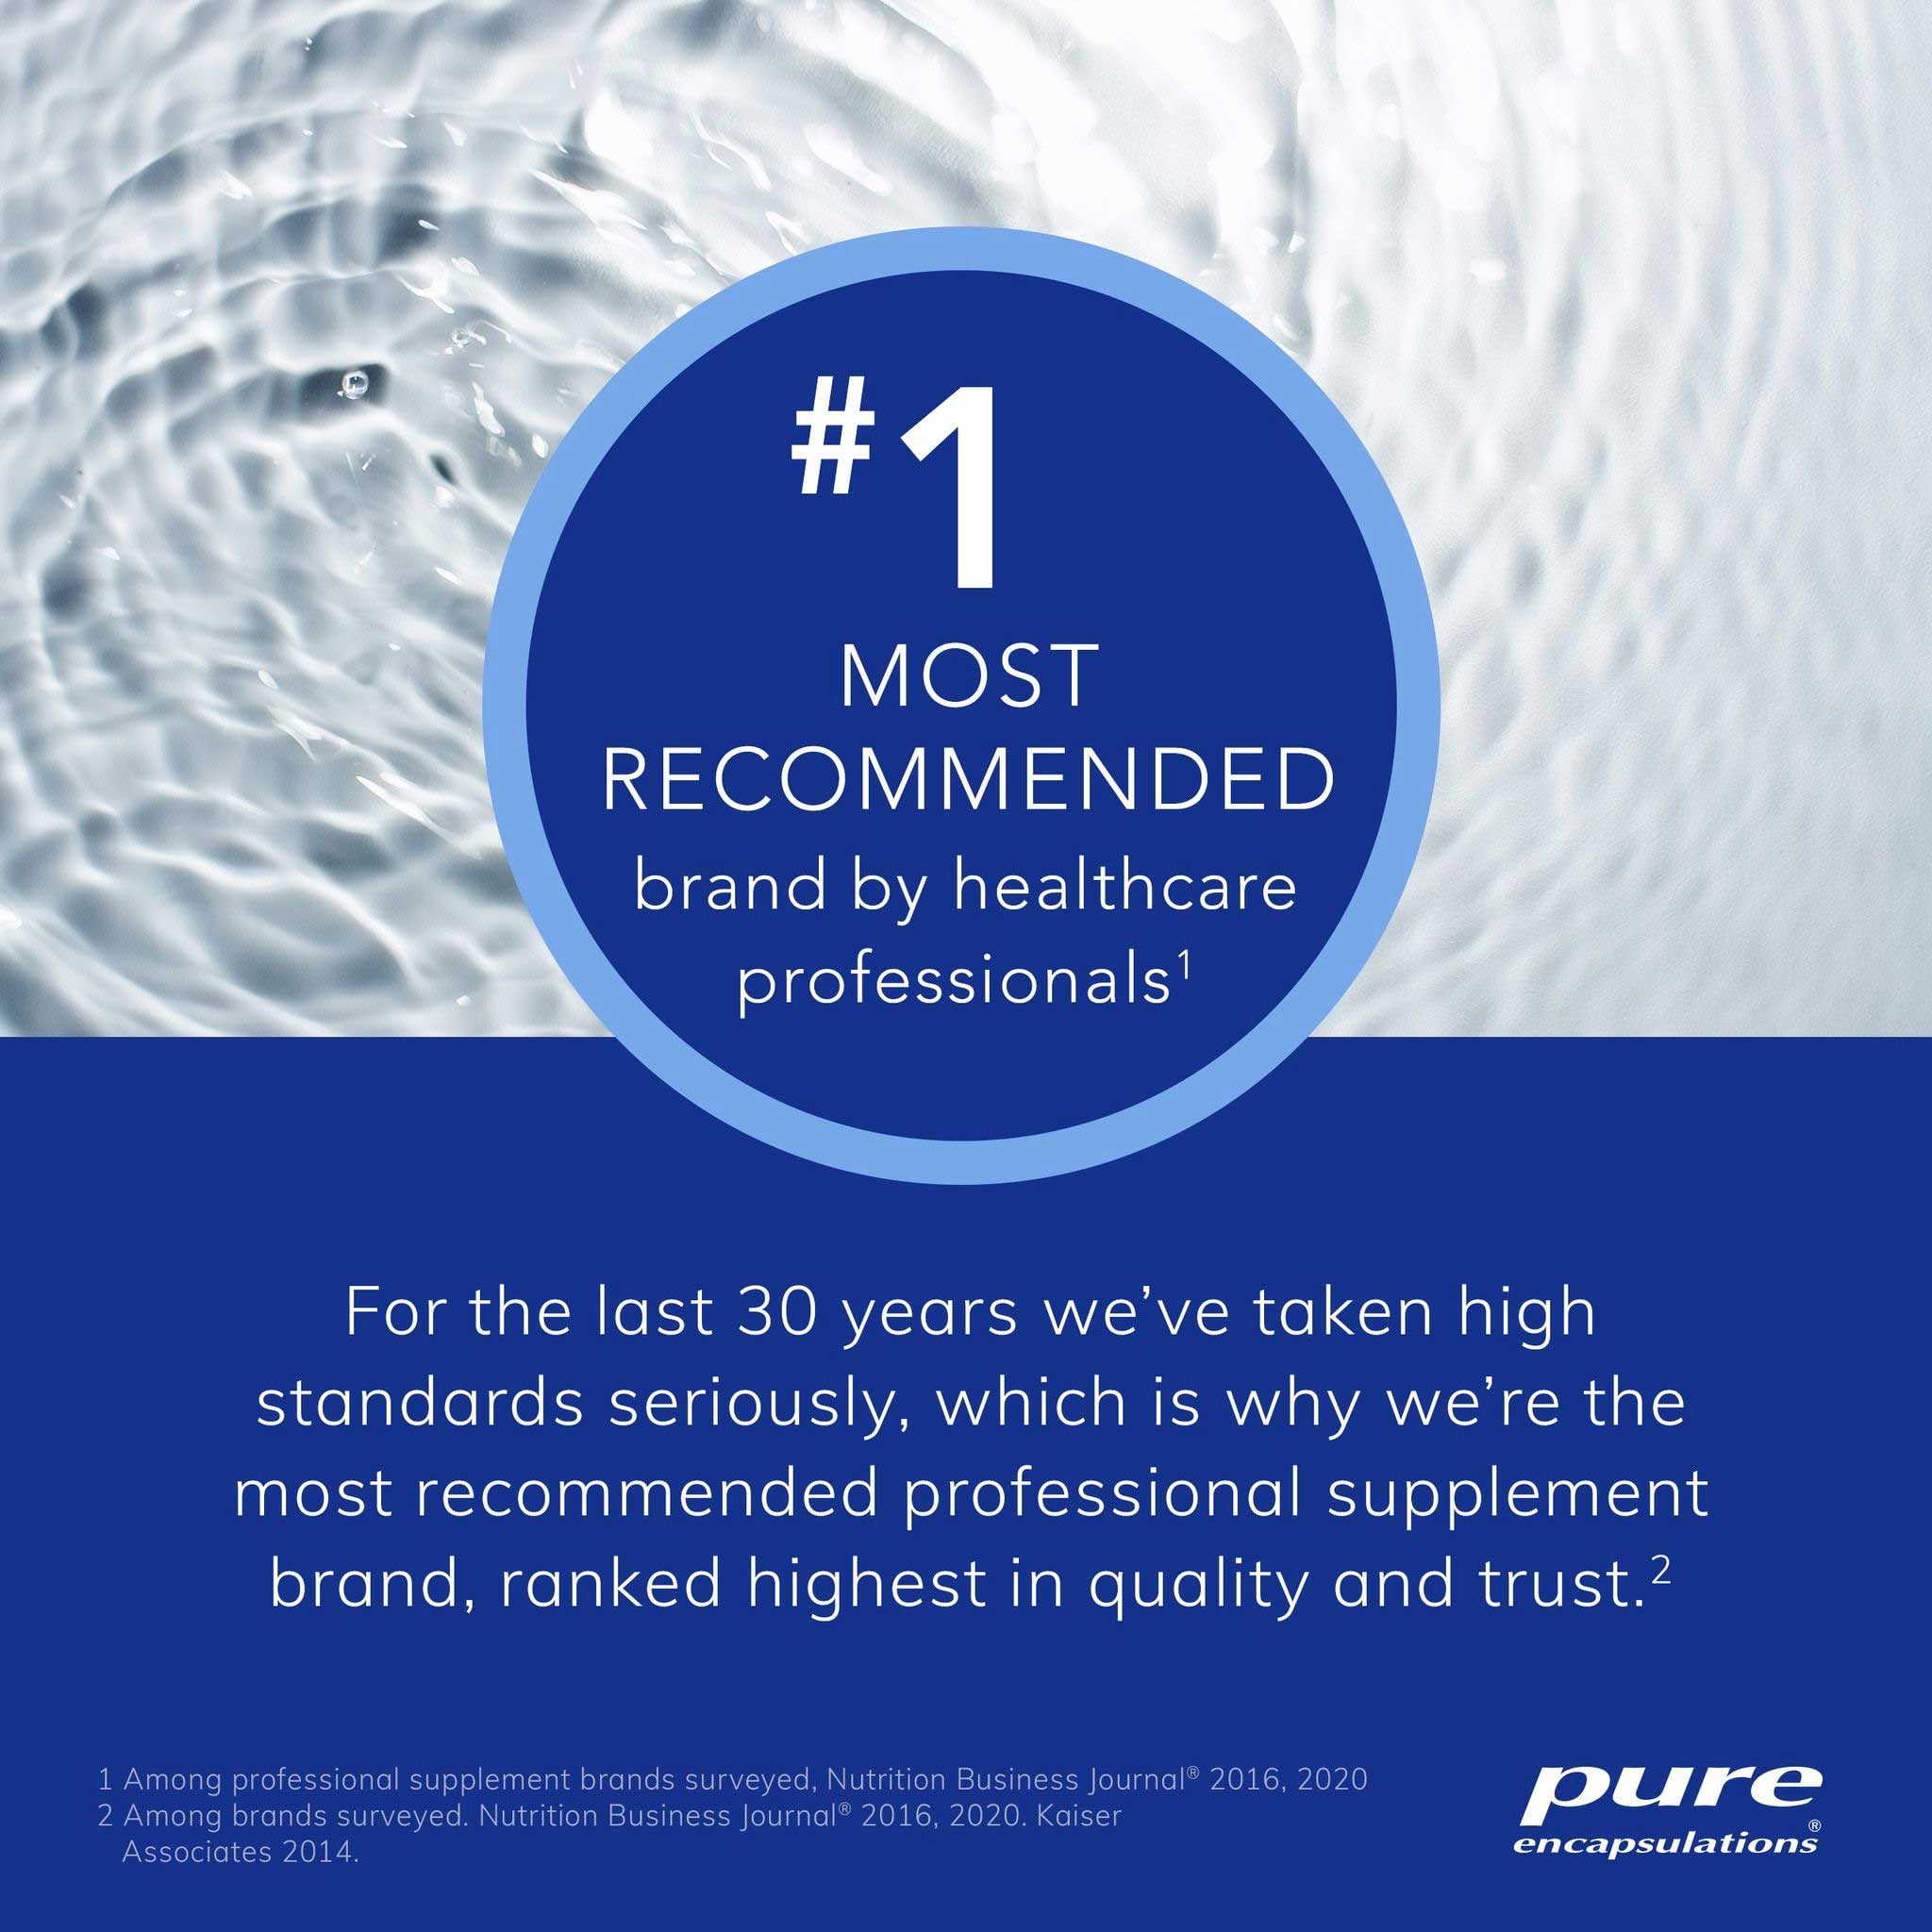 Pure Encapsulations ProSoothe II Most Recommended Brand